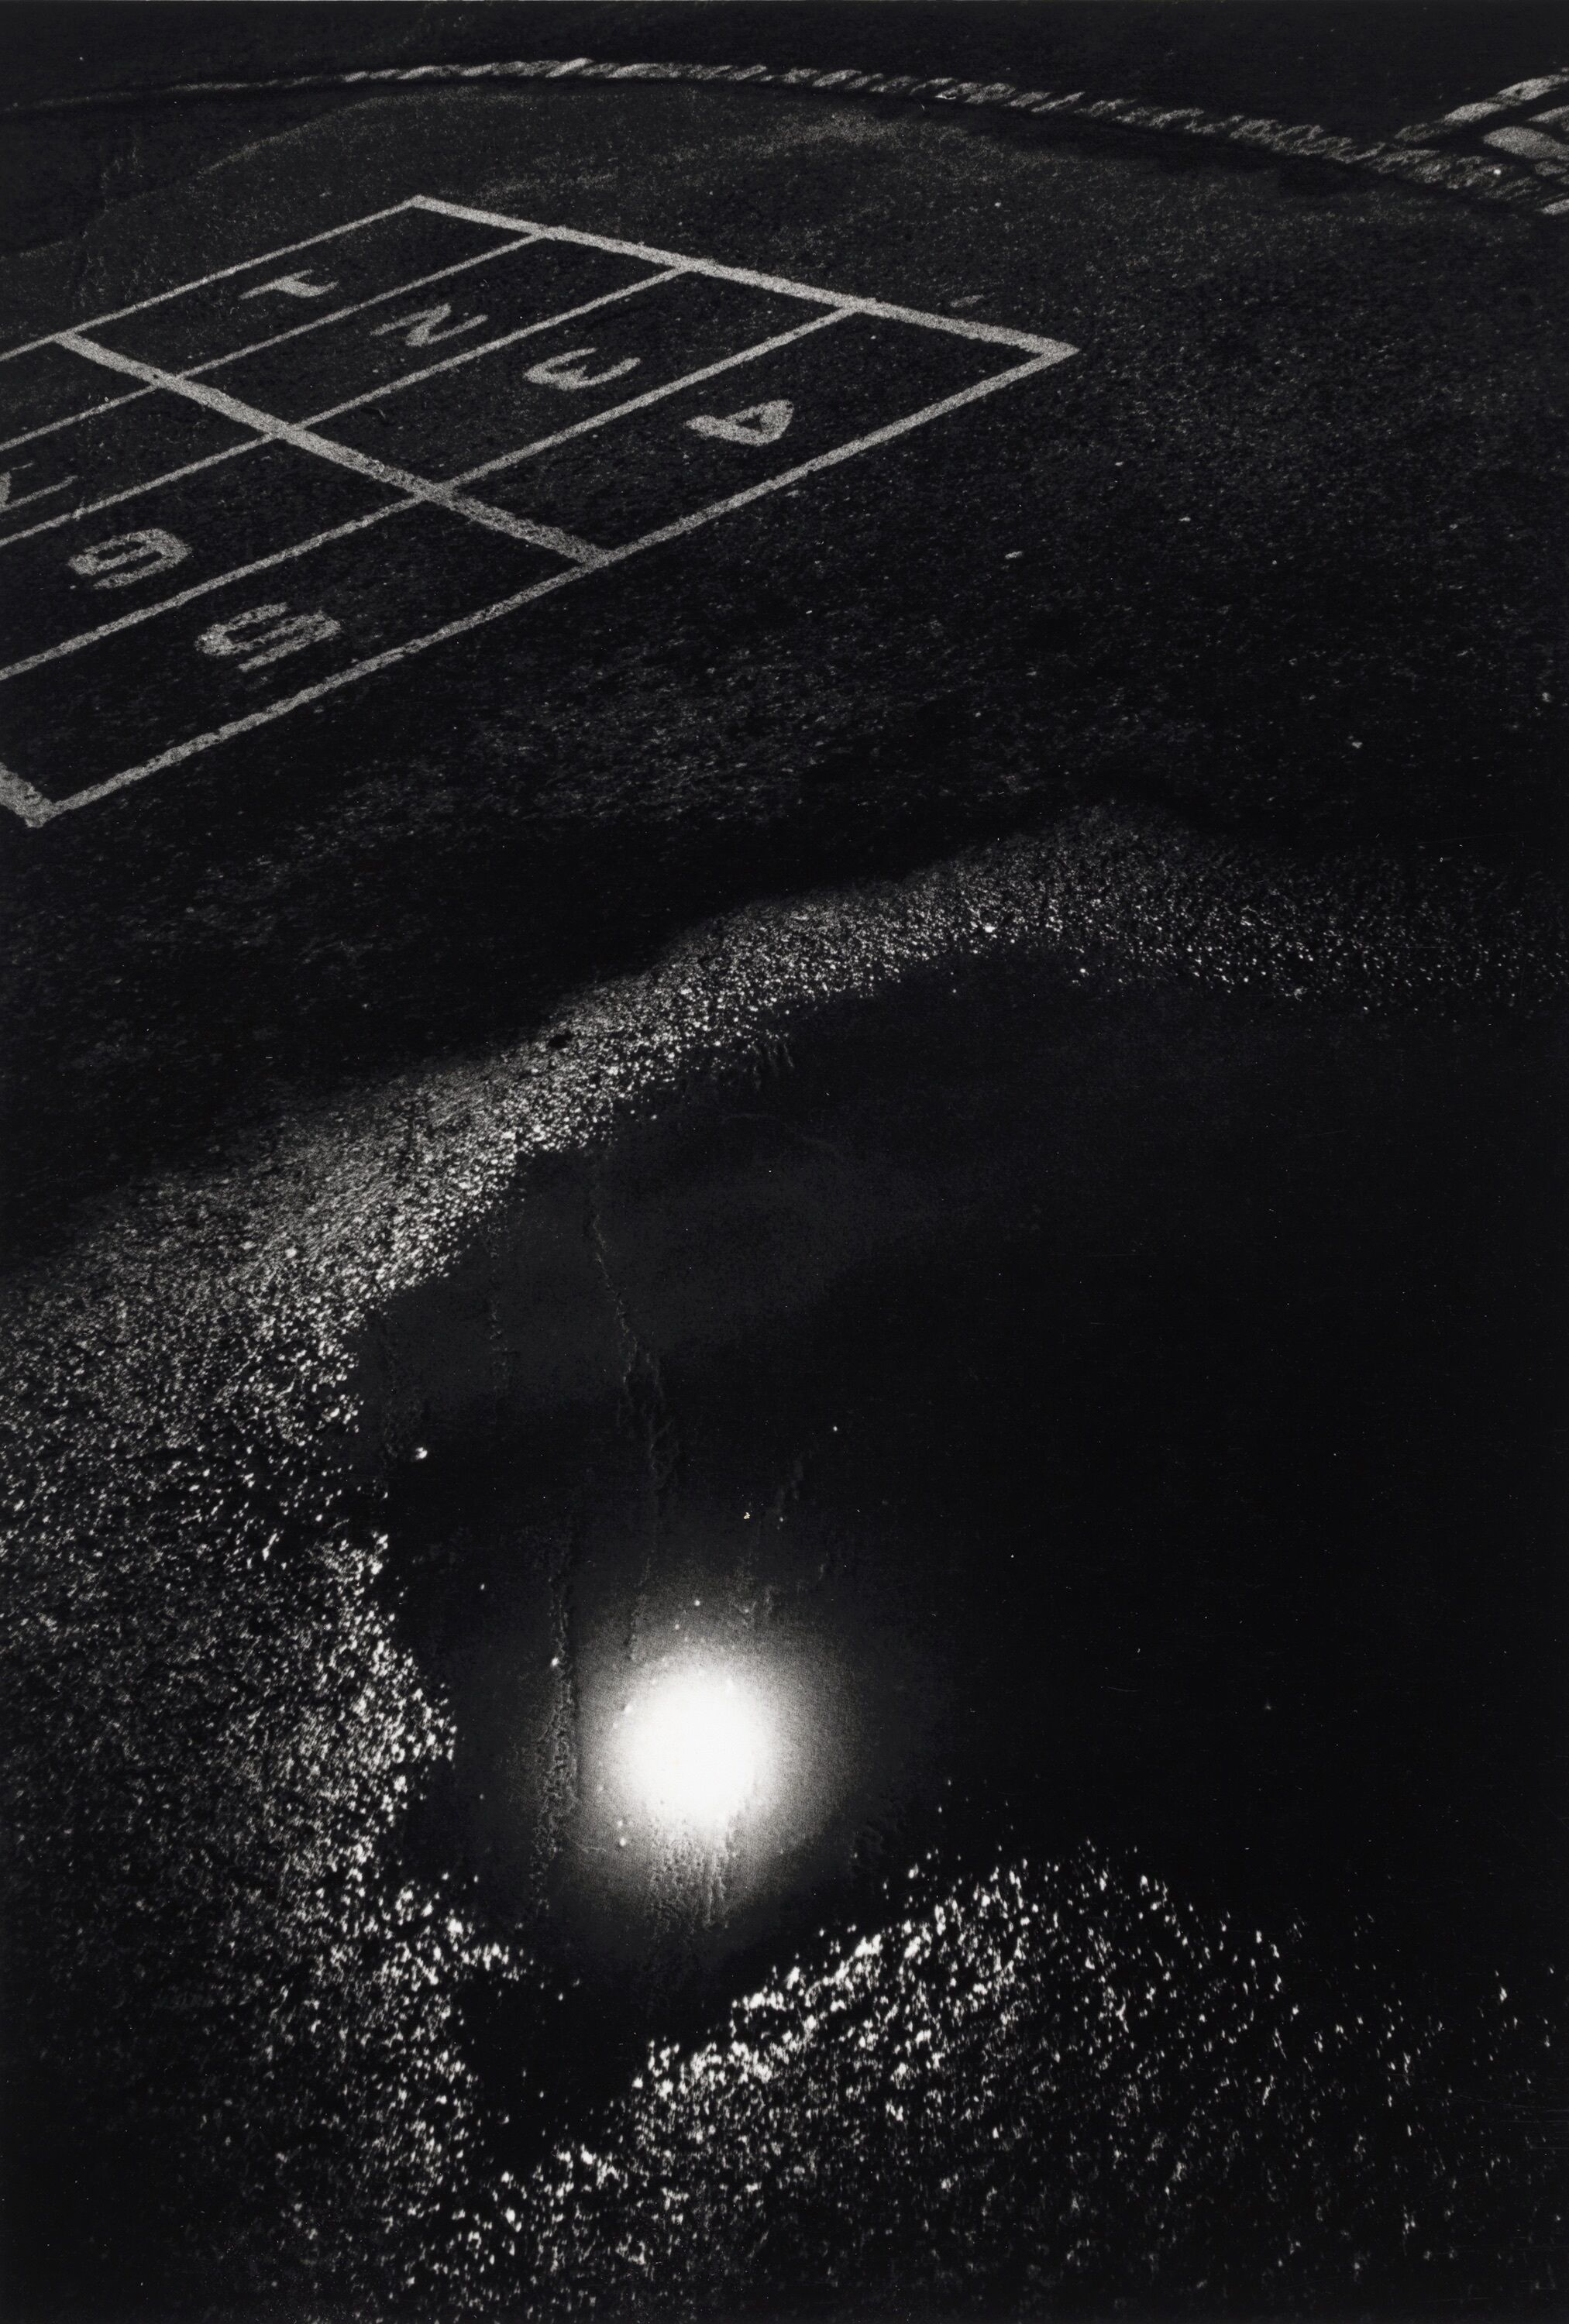 A dark pavement with a large puddle reflecting a source of light.